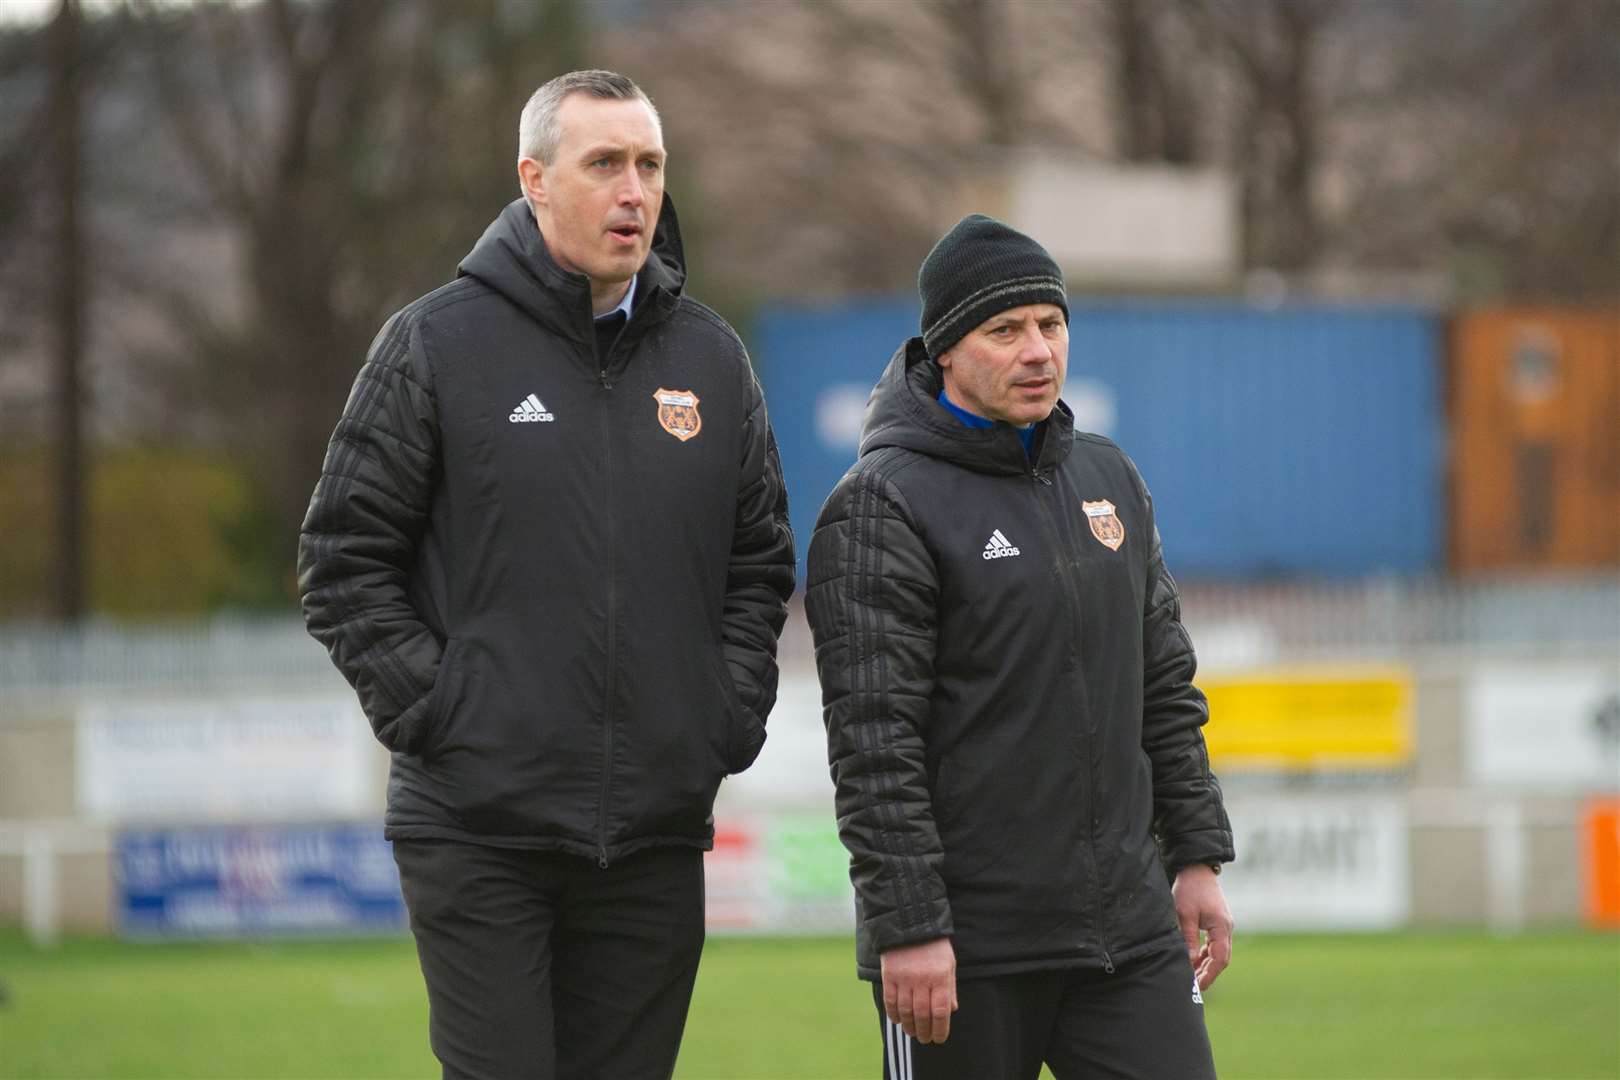 Steven MacDonald (l) and Gordon Connelly (r) during their spell with Rothes...Picture: Daniel Forsyth